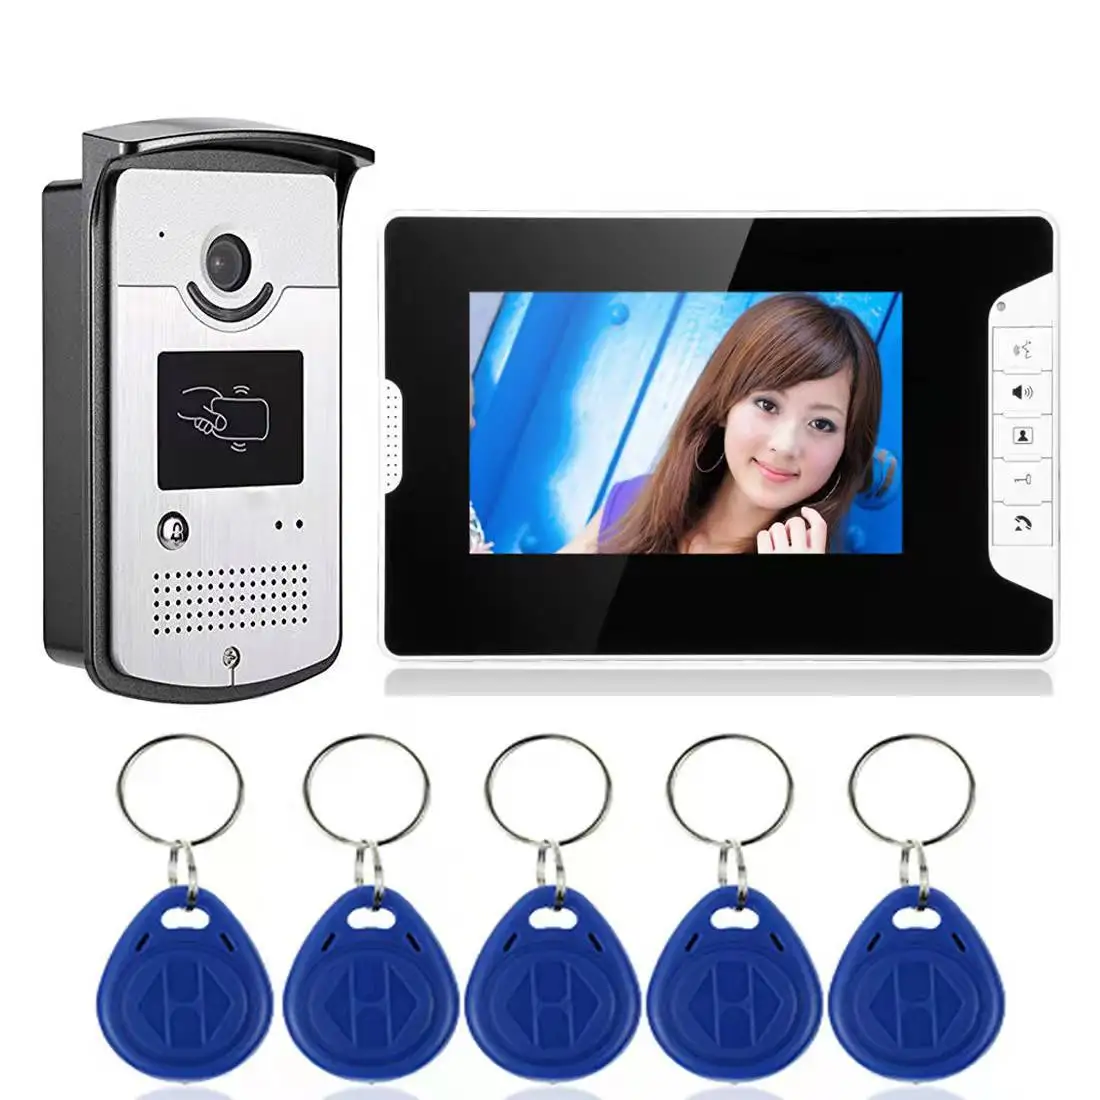 7-inch color visual doorbell outdoor unit ID card night vision rainproof one-to-one visual intercom enlarge